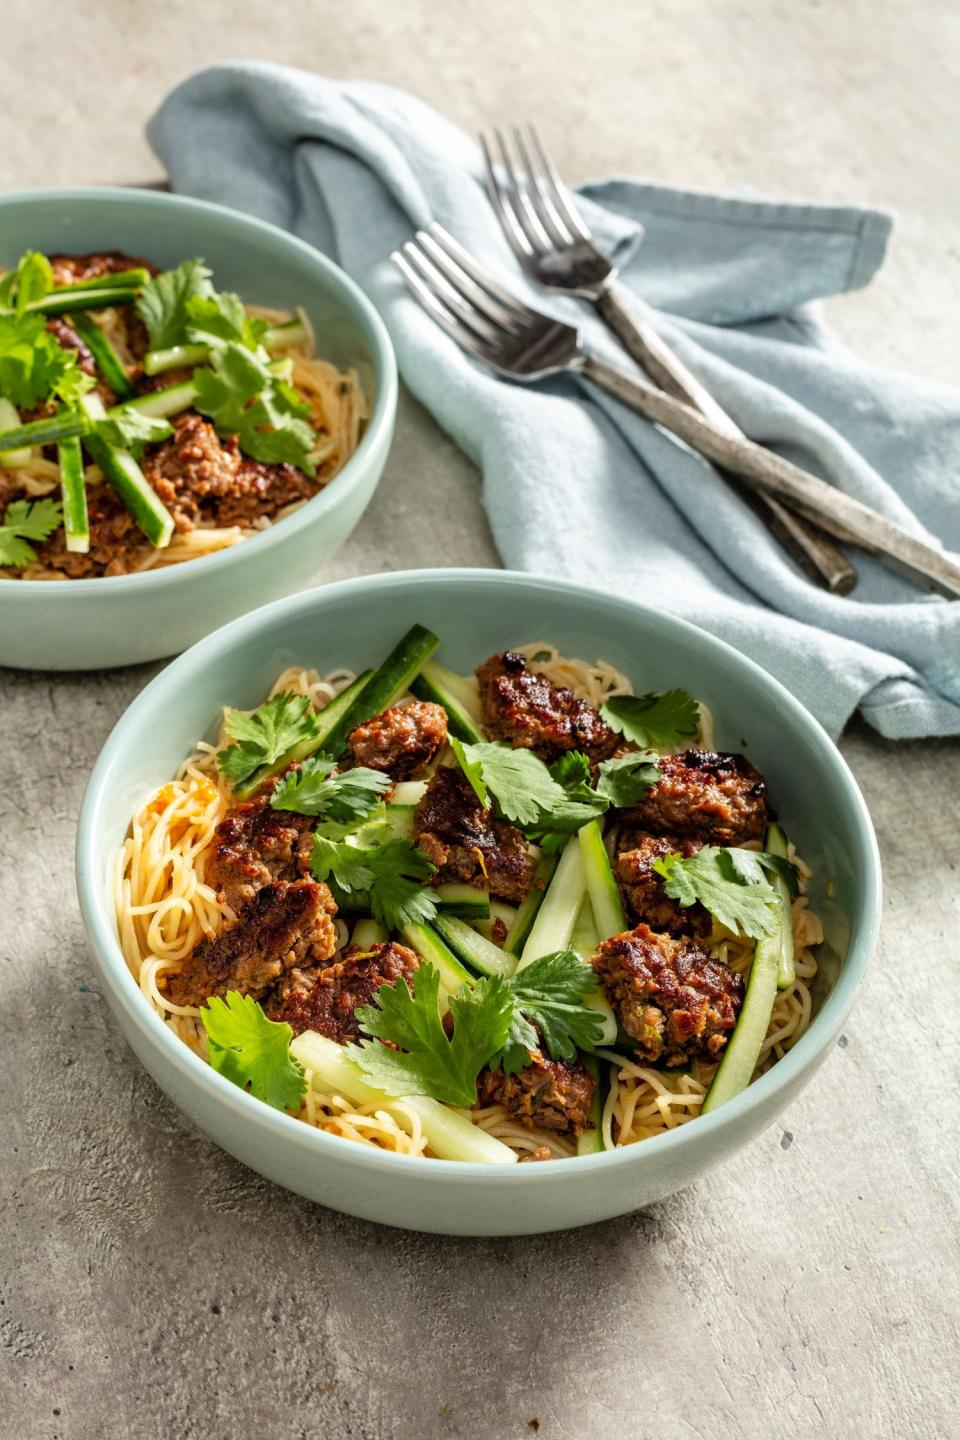 Rice Noodle Bowl with Scallion-Meat Patties and Cucumber has plant-based ground meat as part of the mix.